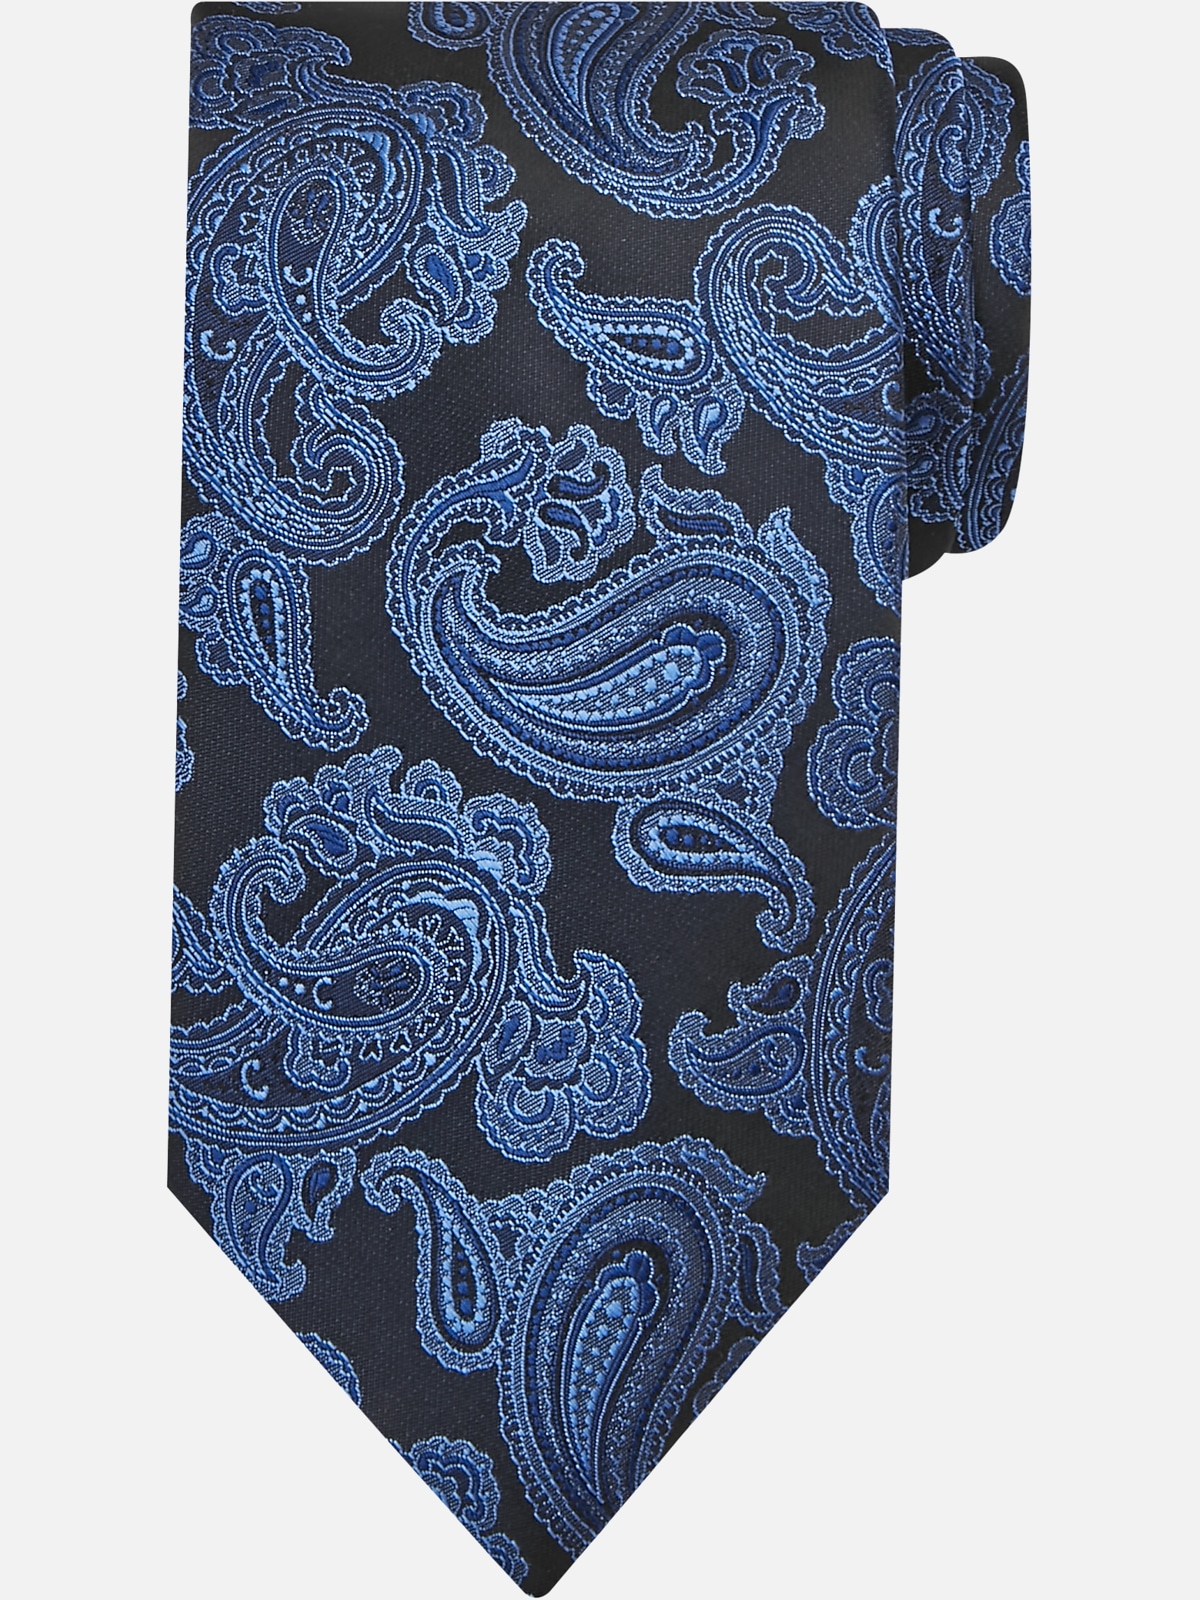 Joseph & Feiss Gold Narrow Paisley Tie | All Clearance $39.99| Men's ...